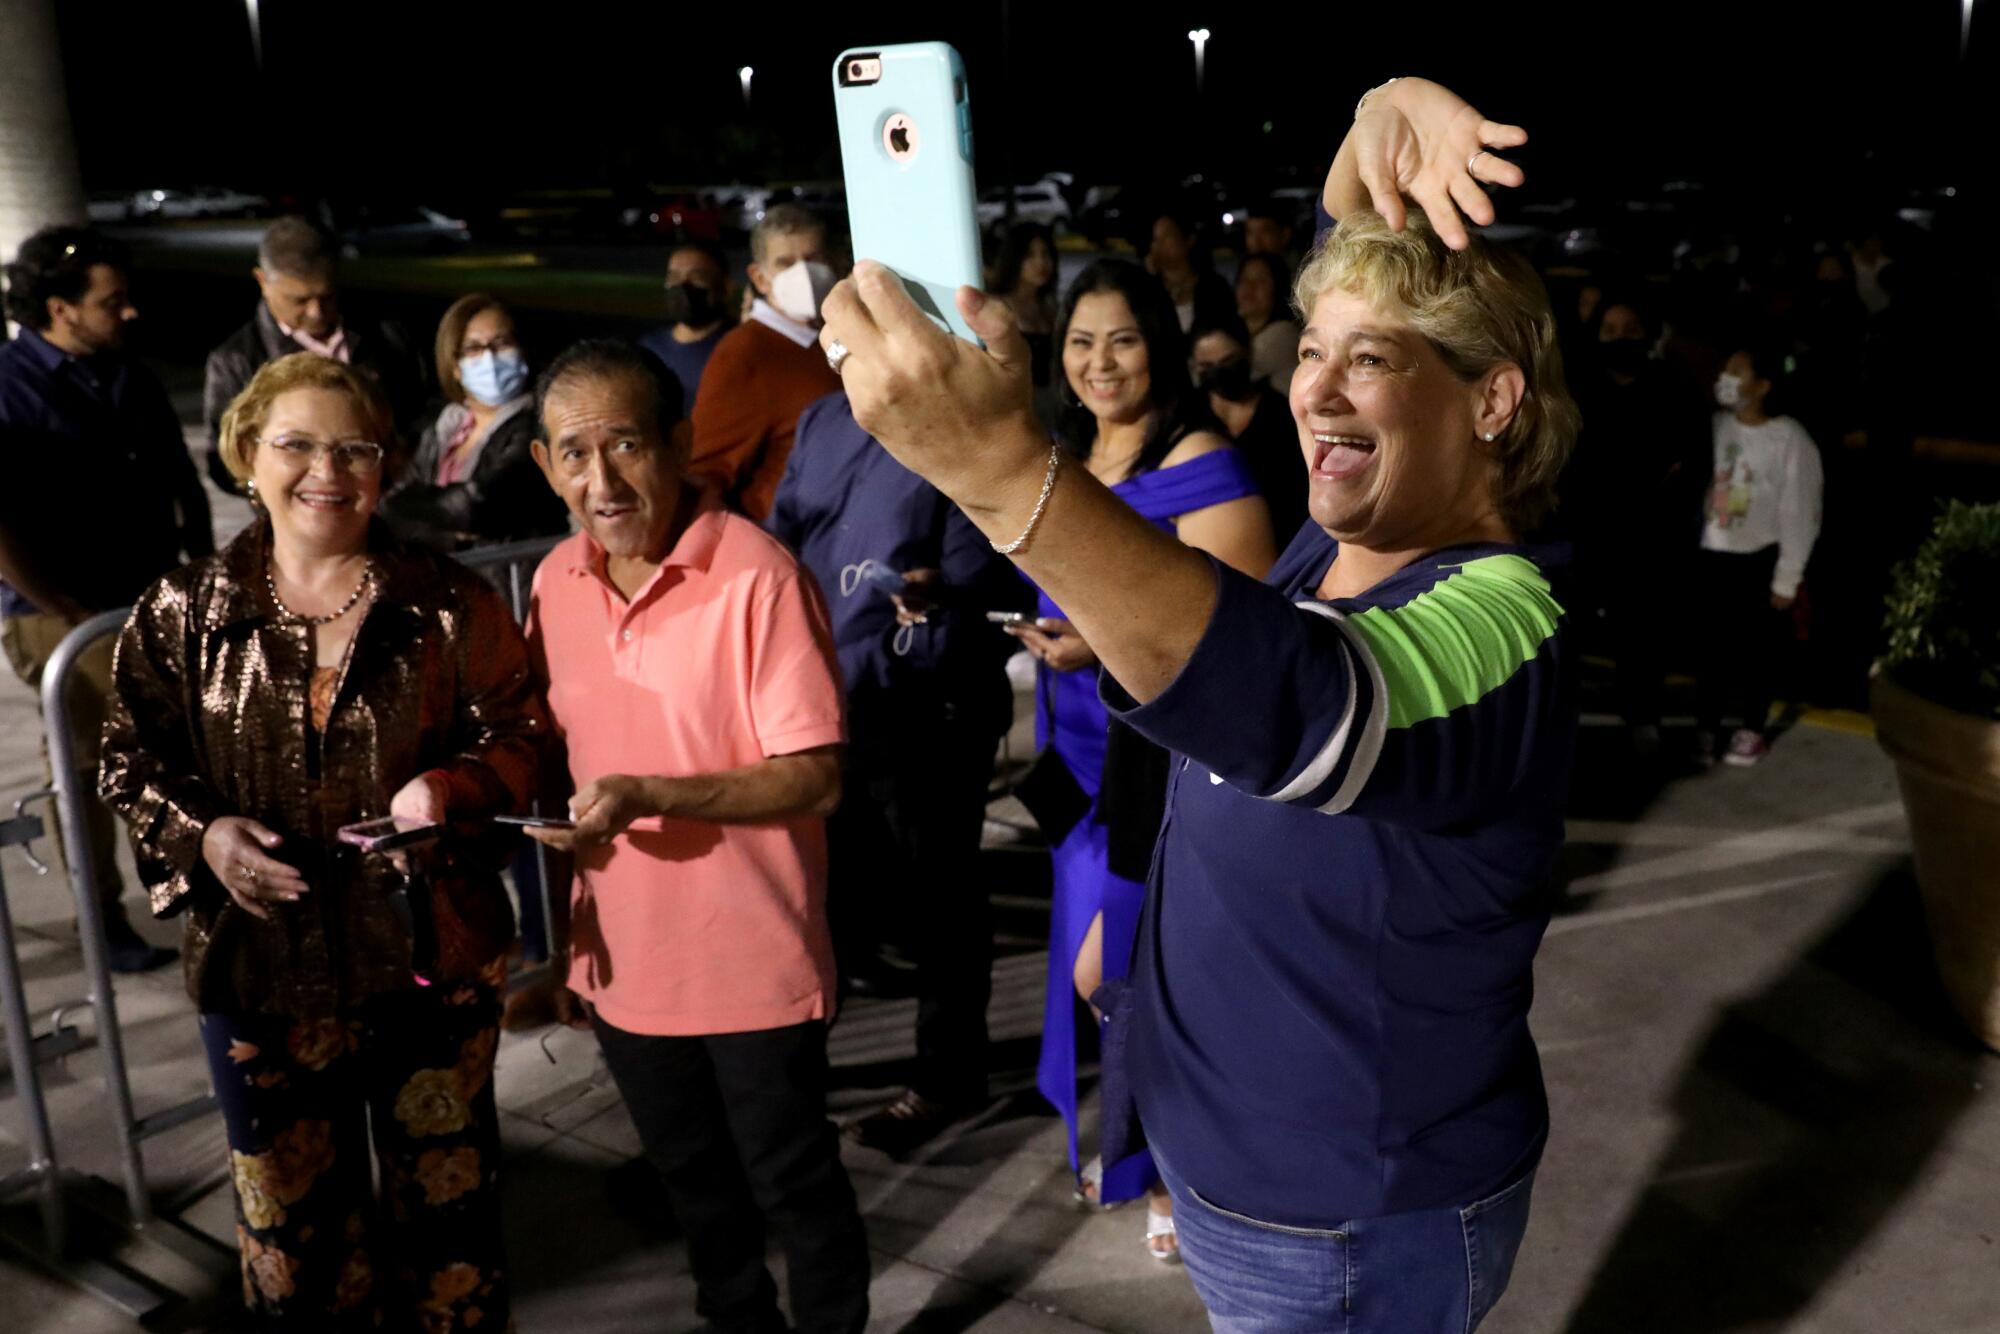 Lucy Garcia, 60, of Cape Coral, Fla., waves on a live video stream.